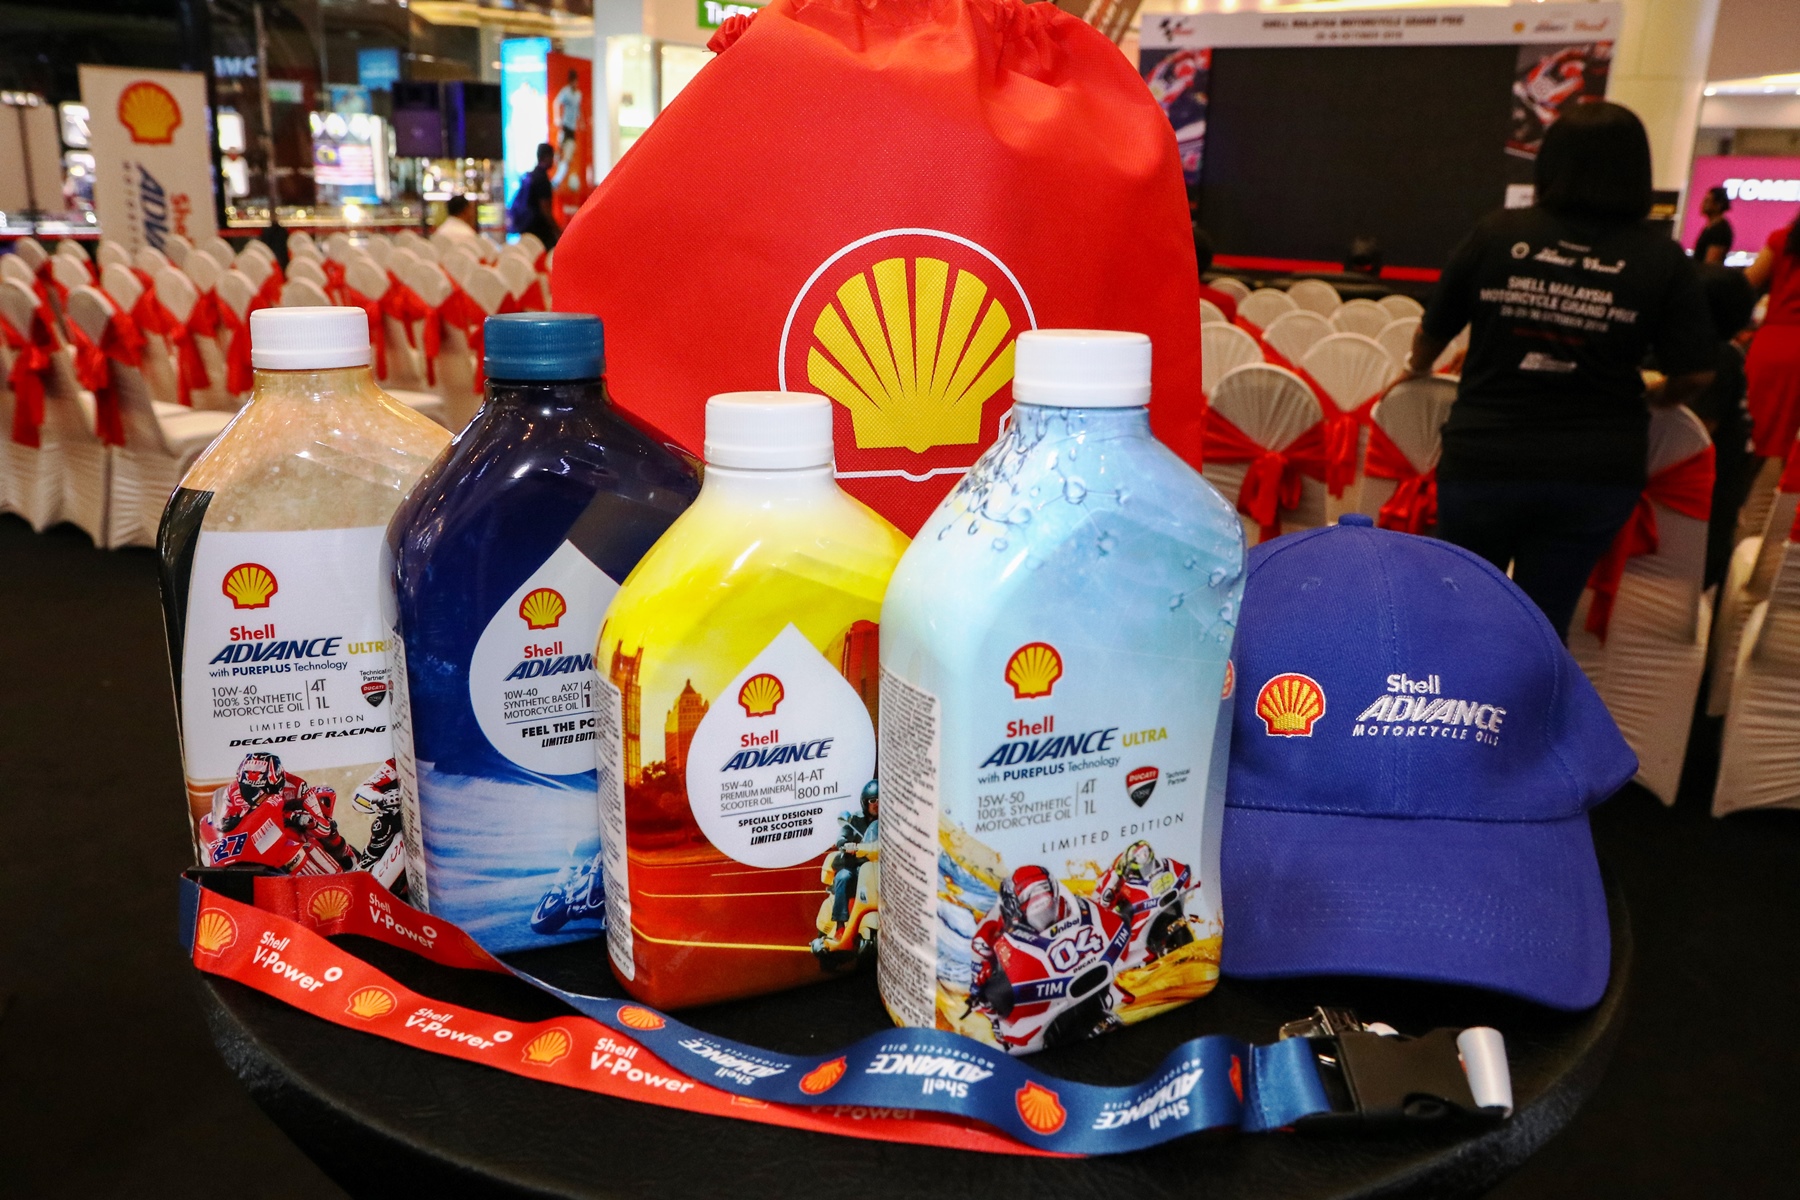 The New Shell Advance Limited Edition Packs